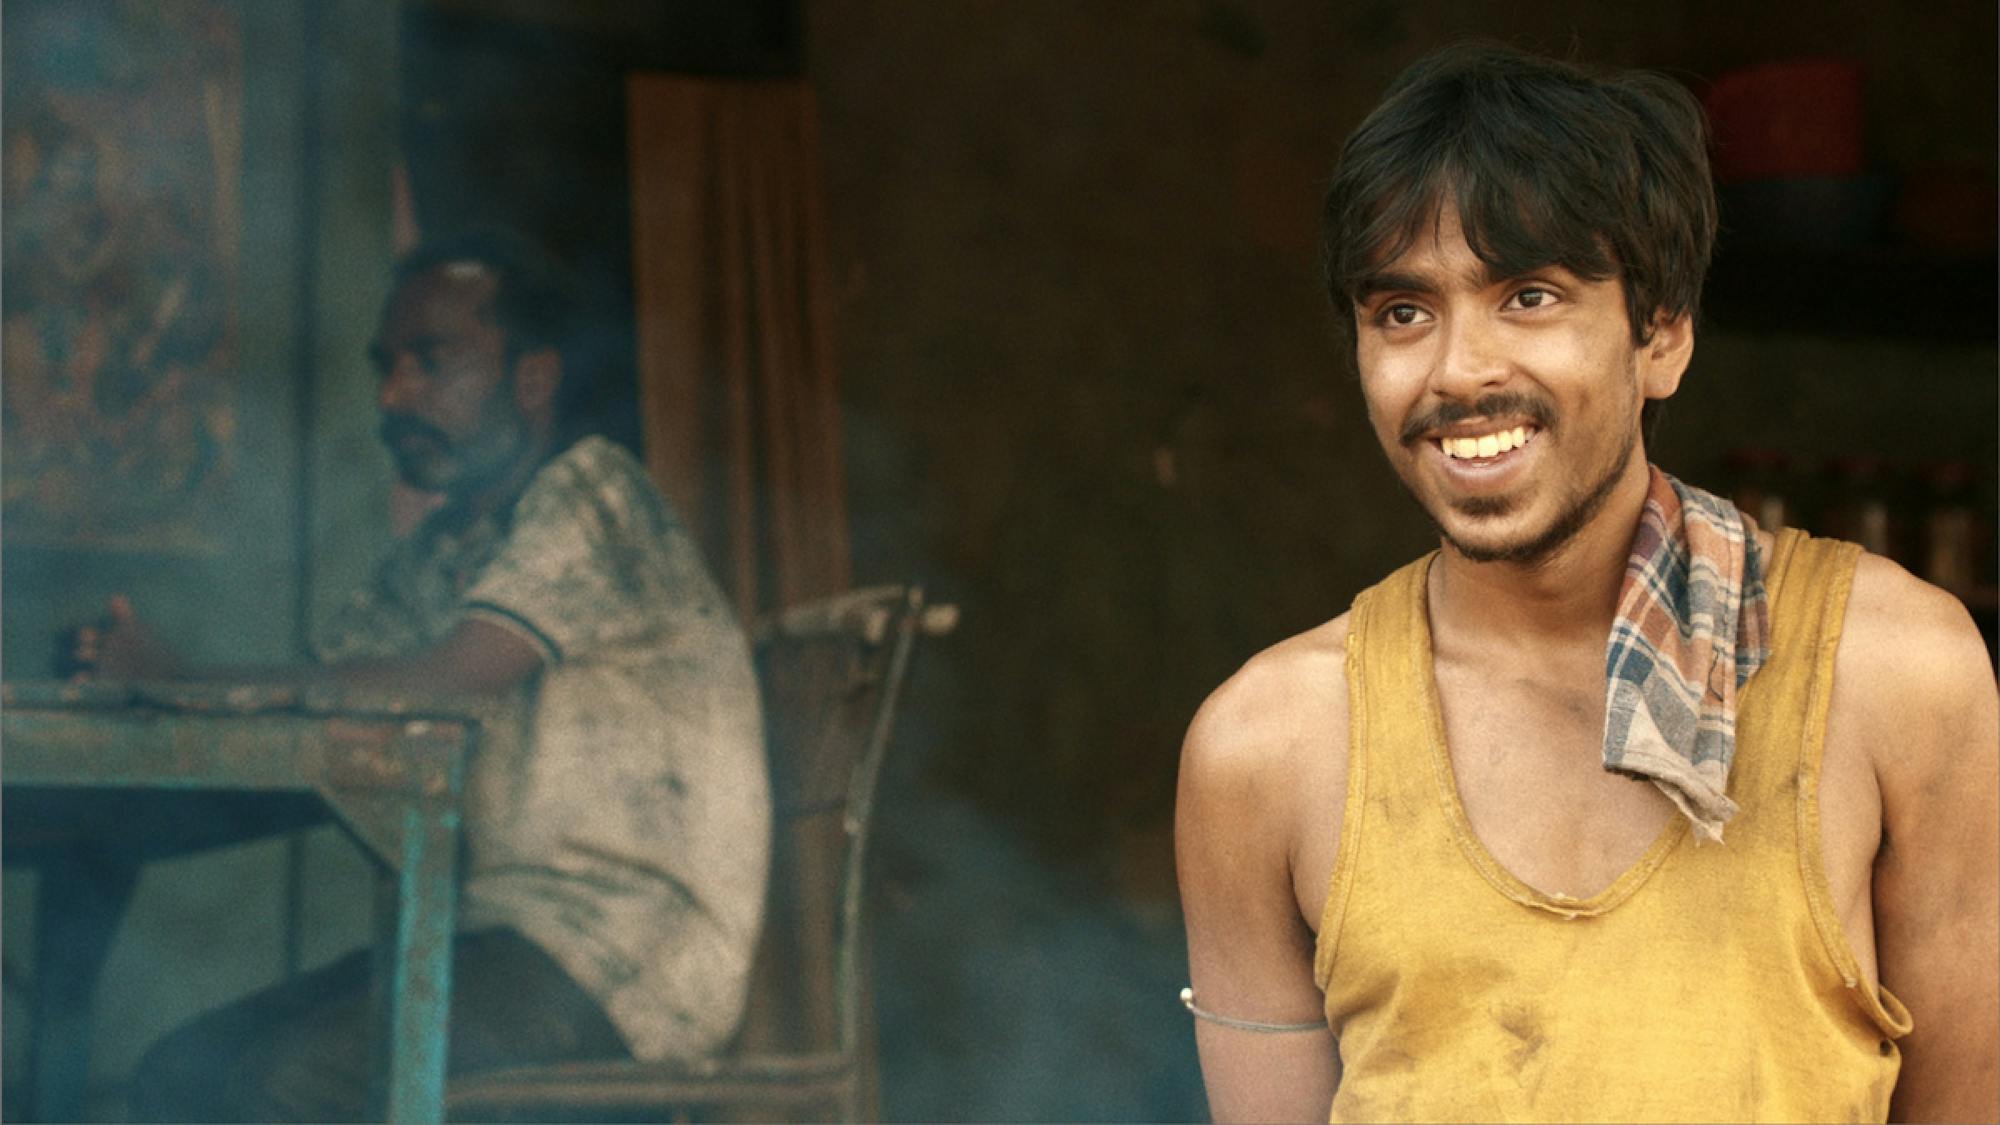 Adarsh Gourav as Balram in a still from the film. He has on a yellow tank top that is dinged with dirt. There’s a blue and red plaid towel laid over his shoulder, and he’s smiling just off camera. 